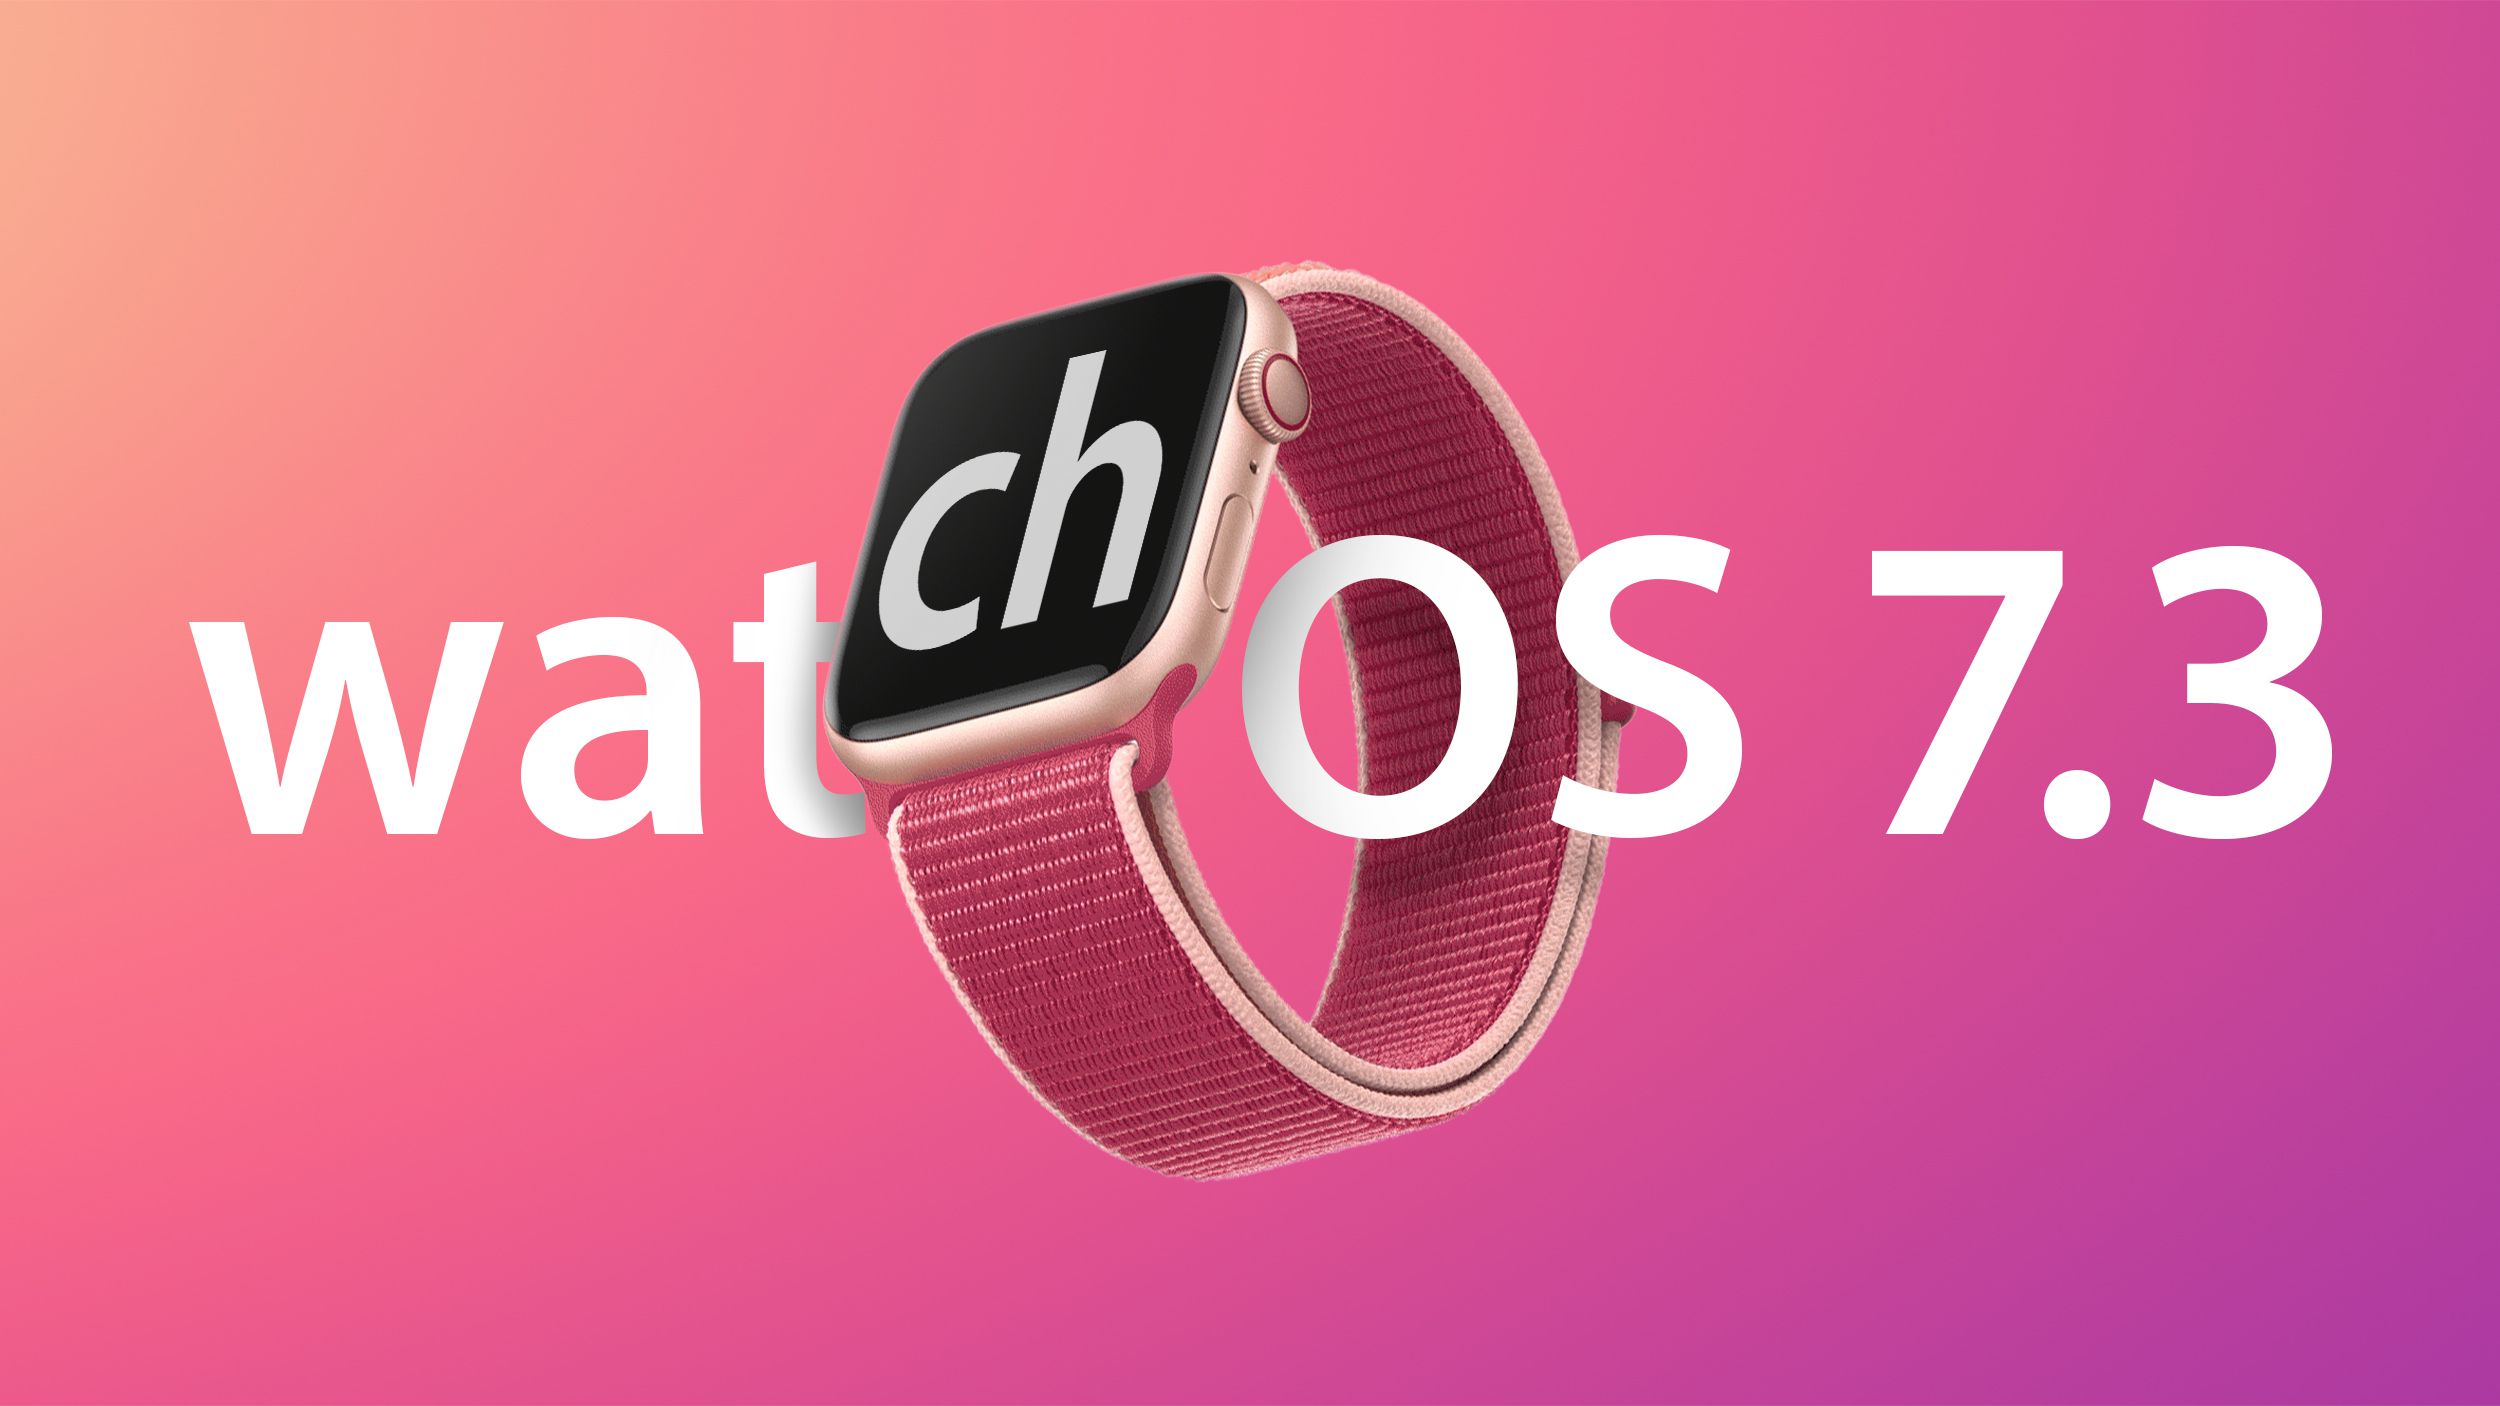 Apple launches watchOS 7.3 with Unity watch face, expanded ECG availability and more